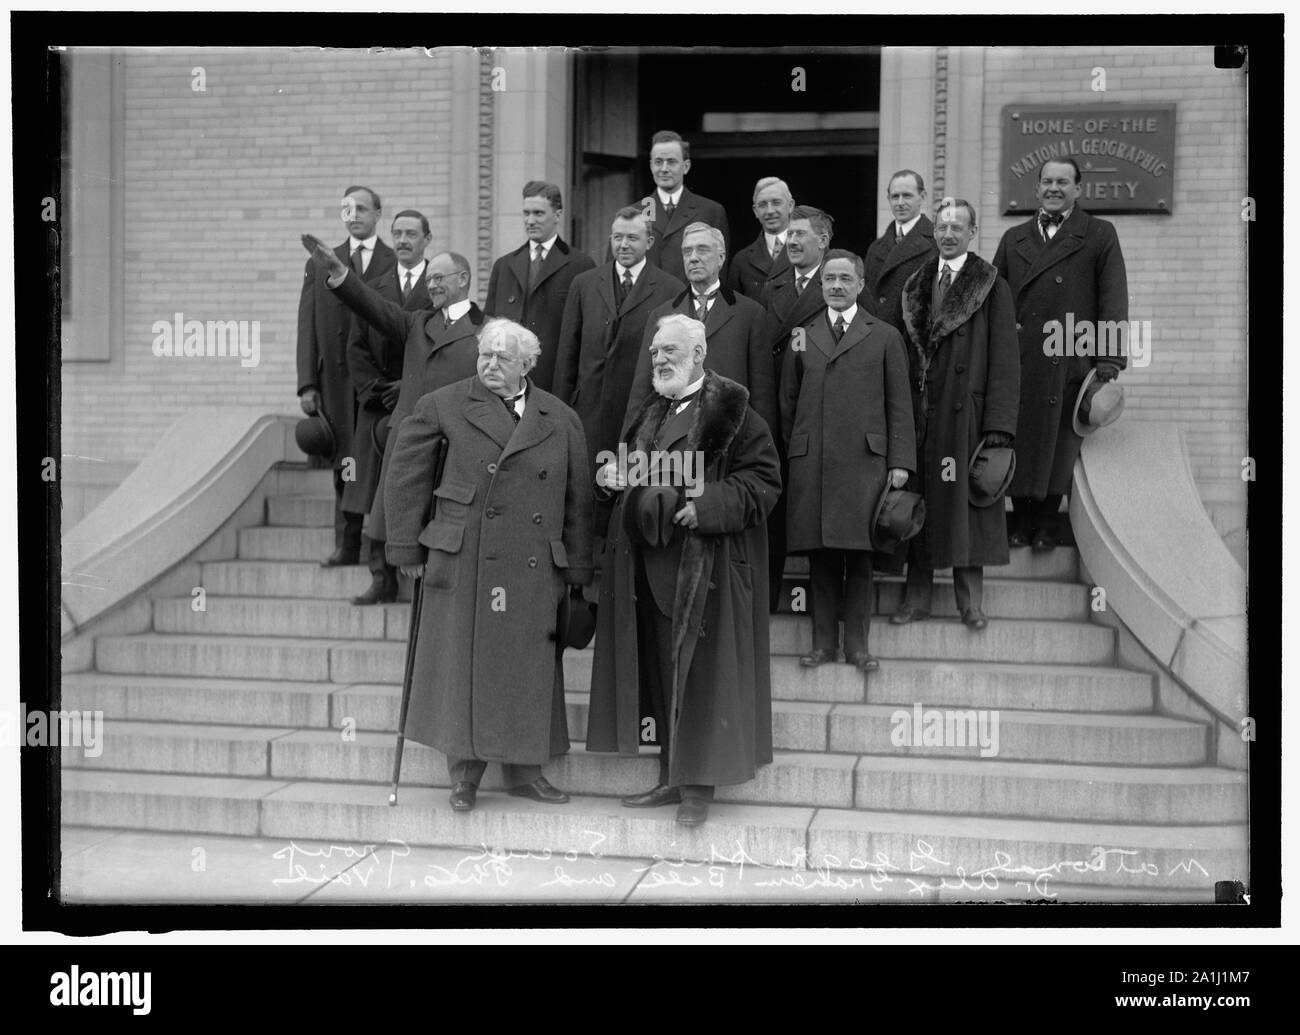 NATIONAL GEOGRAPHICAL SOCIETY. ANNIVERSARY OF BELL TELEPHONE. FRONT: THEODORE N. VAIL AND ALEXANDER GRAHAM BELL; BACK OF BELL, THOMAS A WATSON, ASSOC. WITH BELL IN EXPERIMENTS. DIAGONALLY UPWARD, RIGHT: J.J. CARTY; G.H. GROSVENOR; J.O. LaGORCE Stock Photo